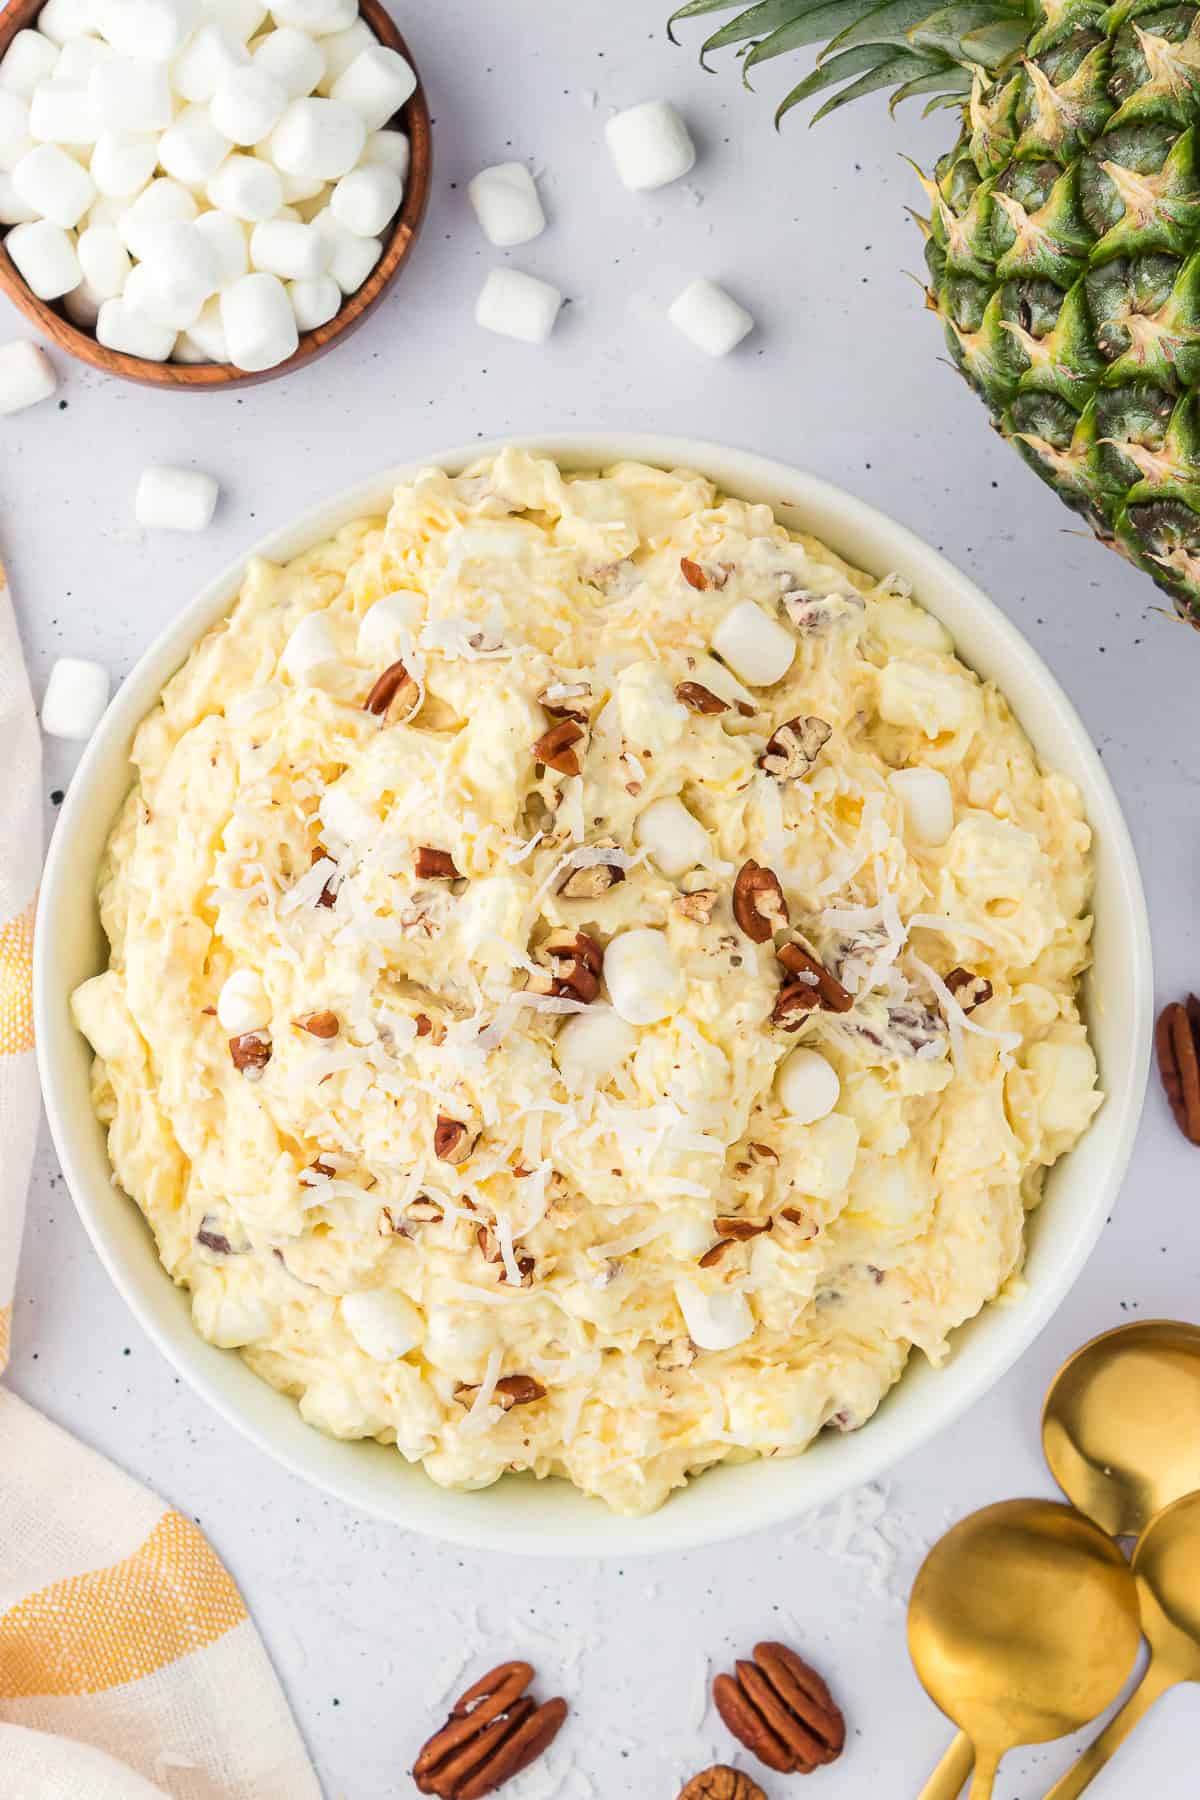 pineapple fluff in a white bowl surrounded by a whole pineapple, a bowl of mini marshmallows, a white and orange kitchen towels, more nuts and scattered mini marshmallows and gold spoons